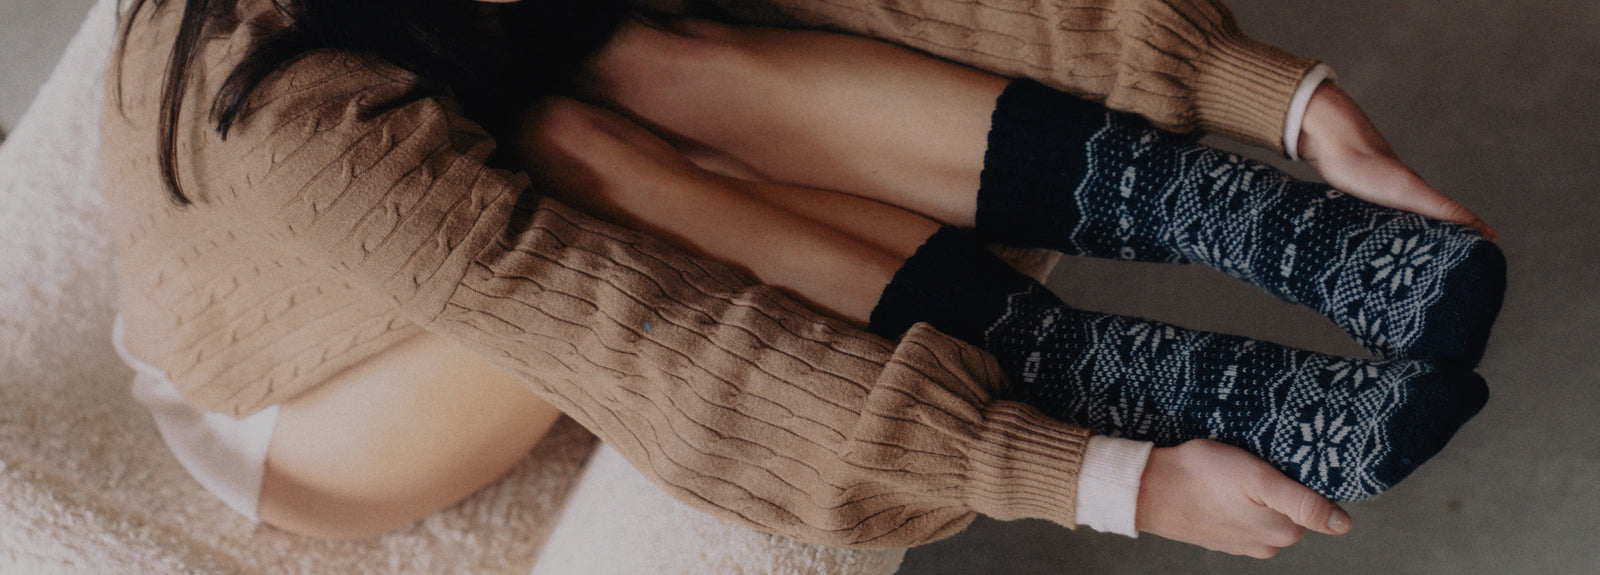 How to Care for your Merino Wool Socks